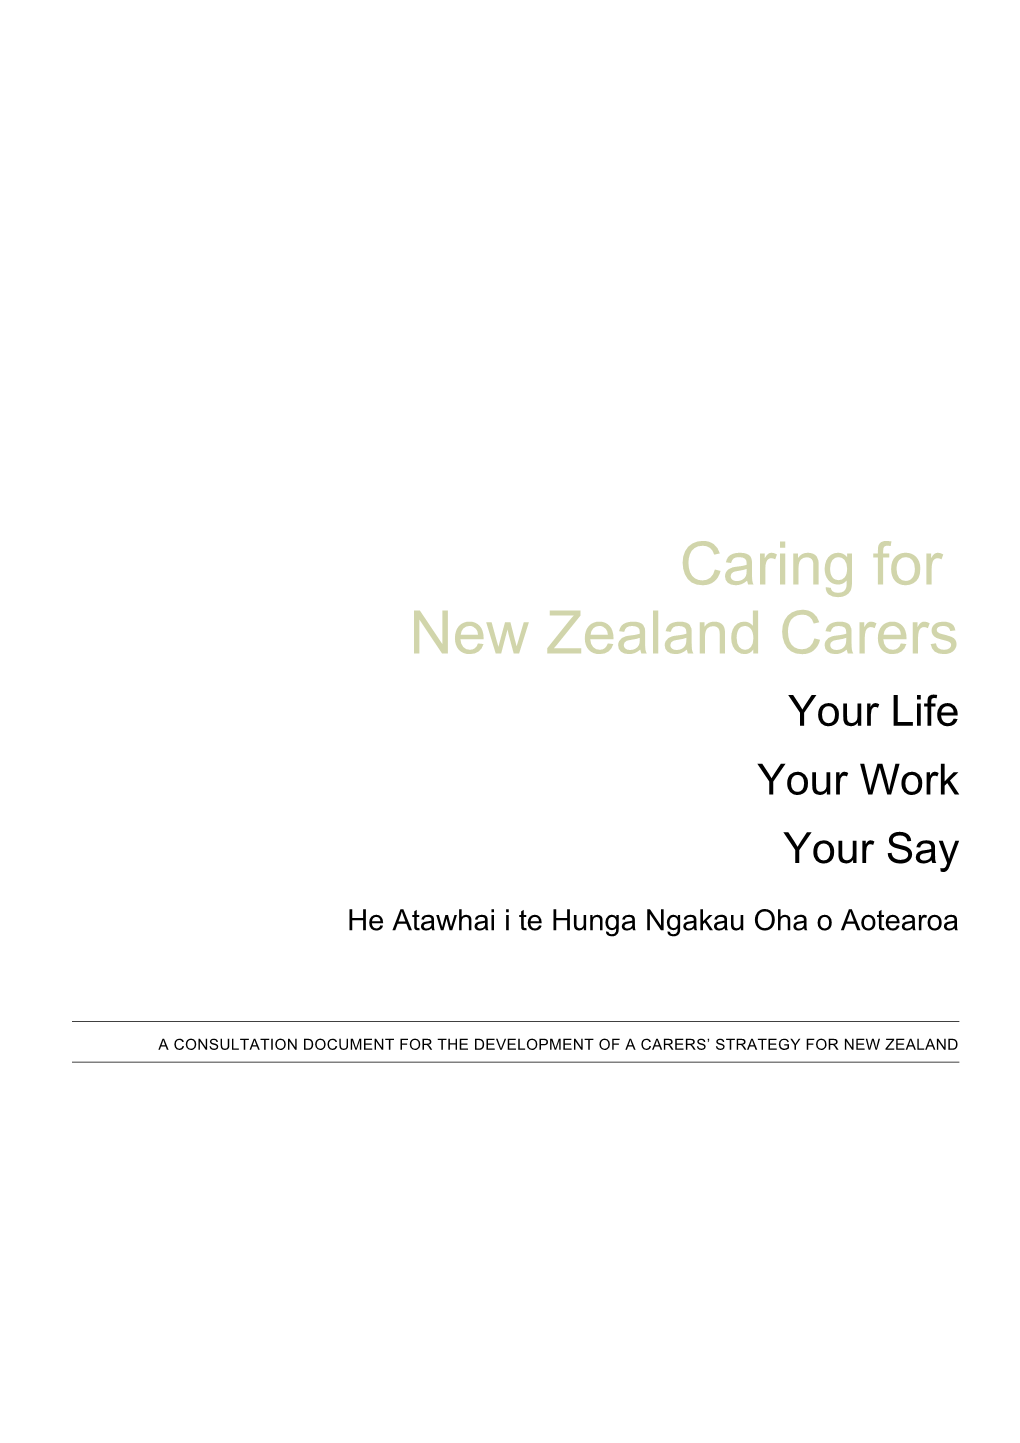 Caring for New Zealand Carers